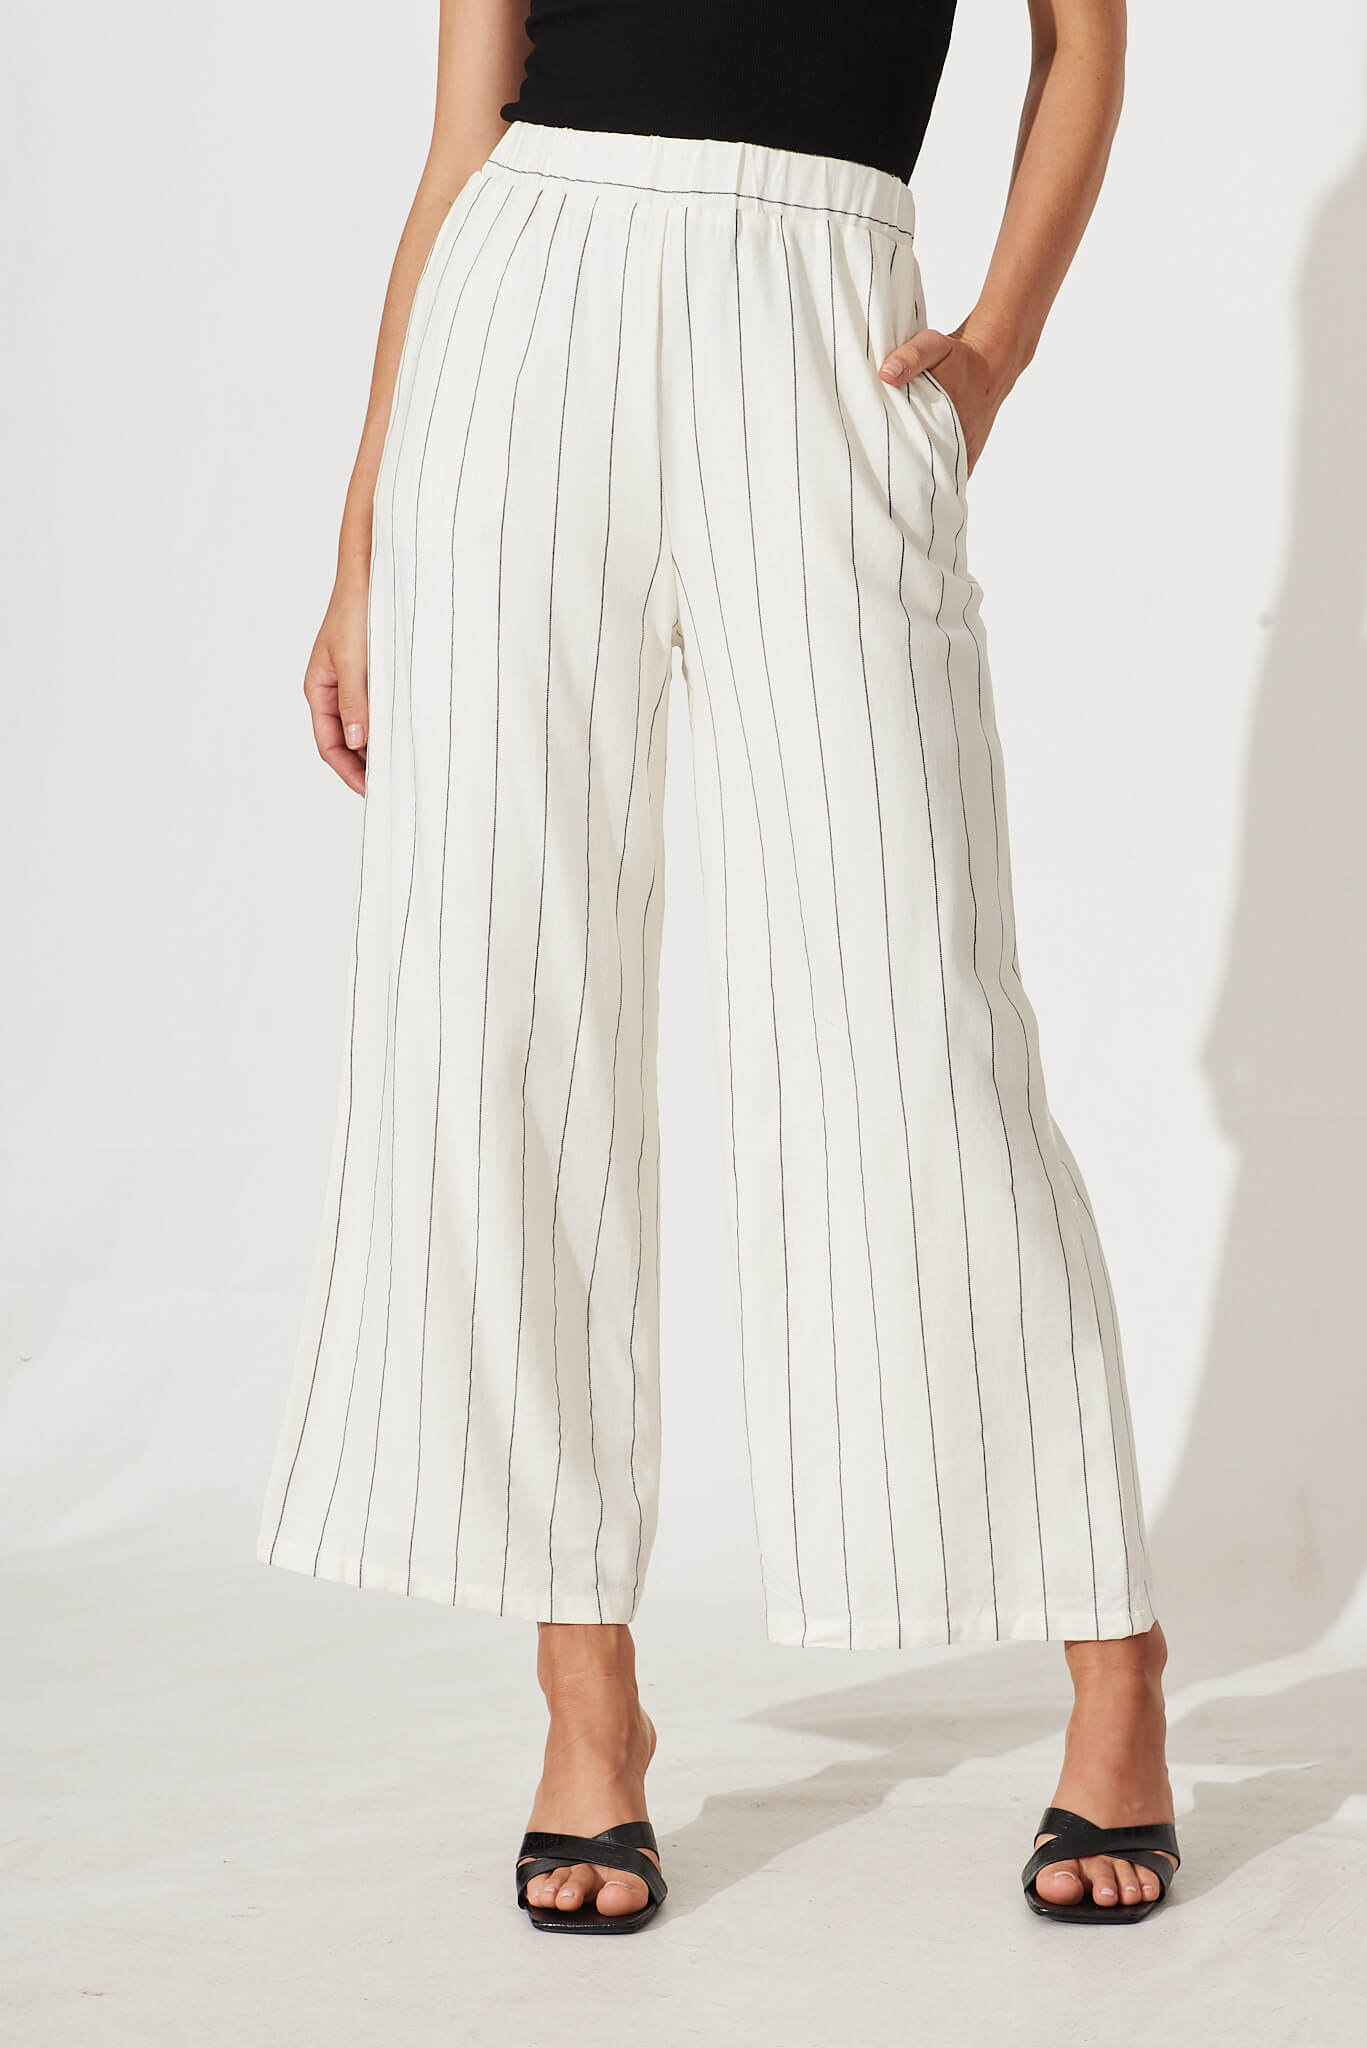 Eloisa Pant In Cream With Black Pinstripe Cotton Linen - front